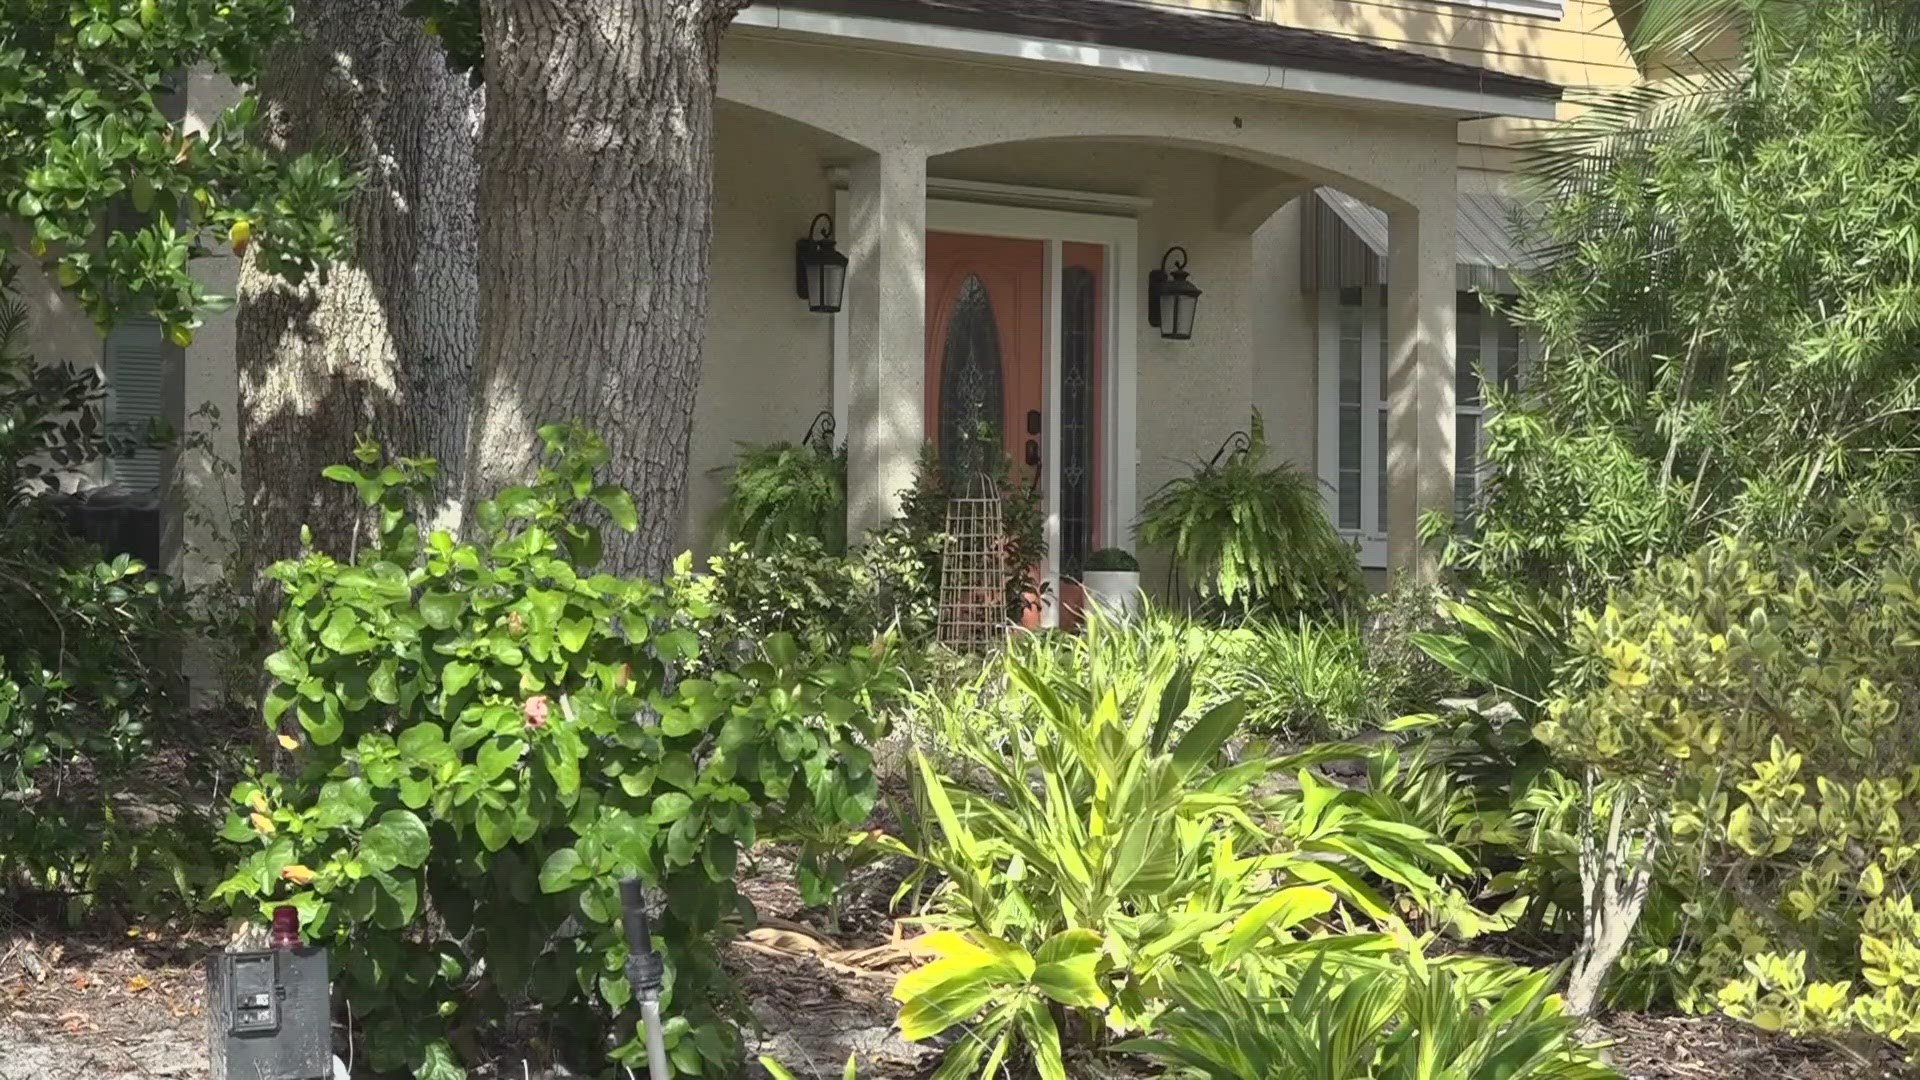 A bill revamping how short-term rentals would be regulated will take center stage Thursday.